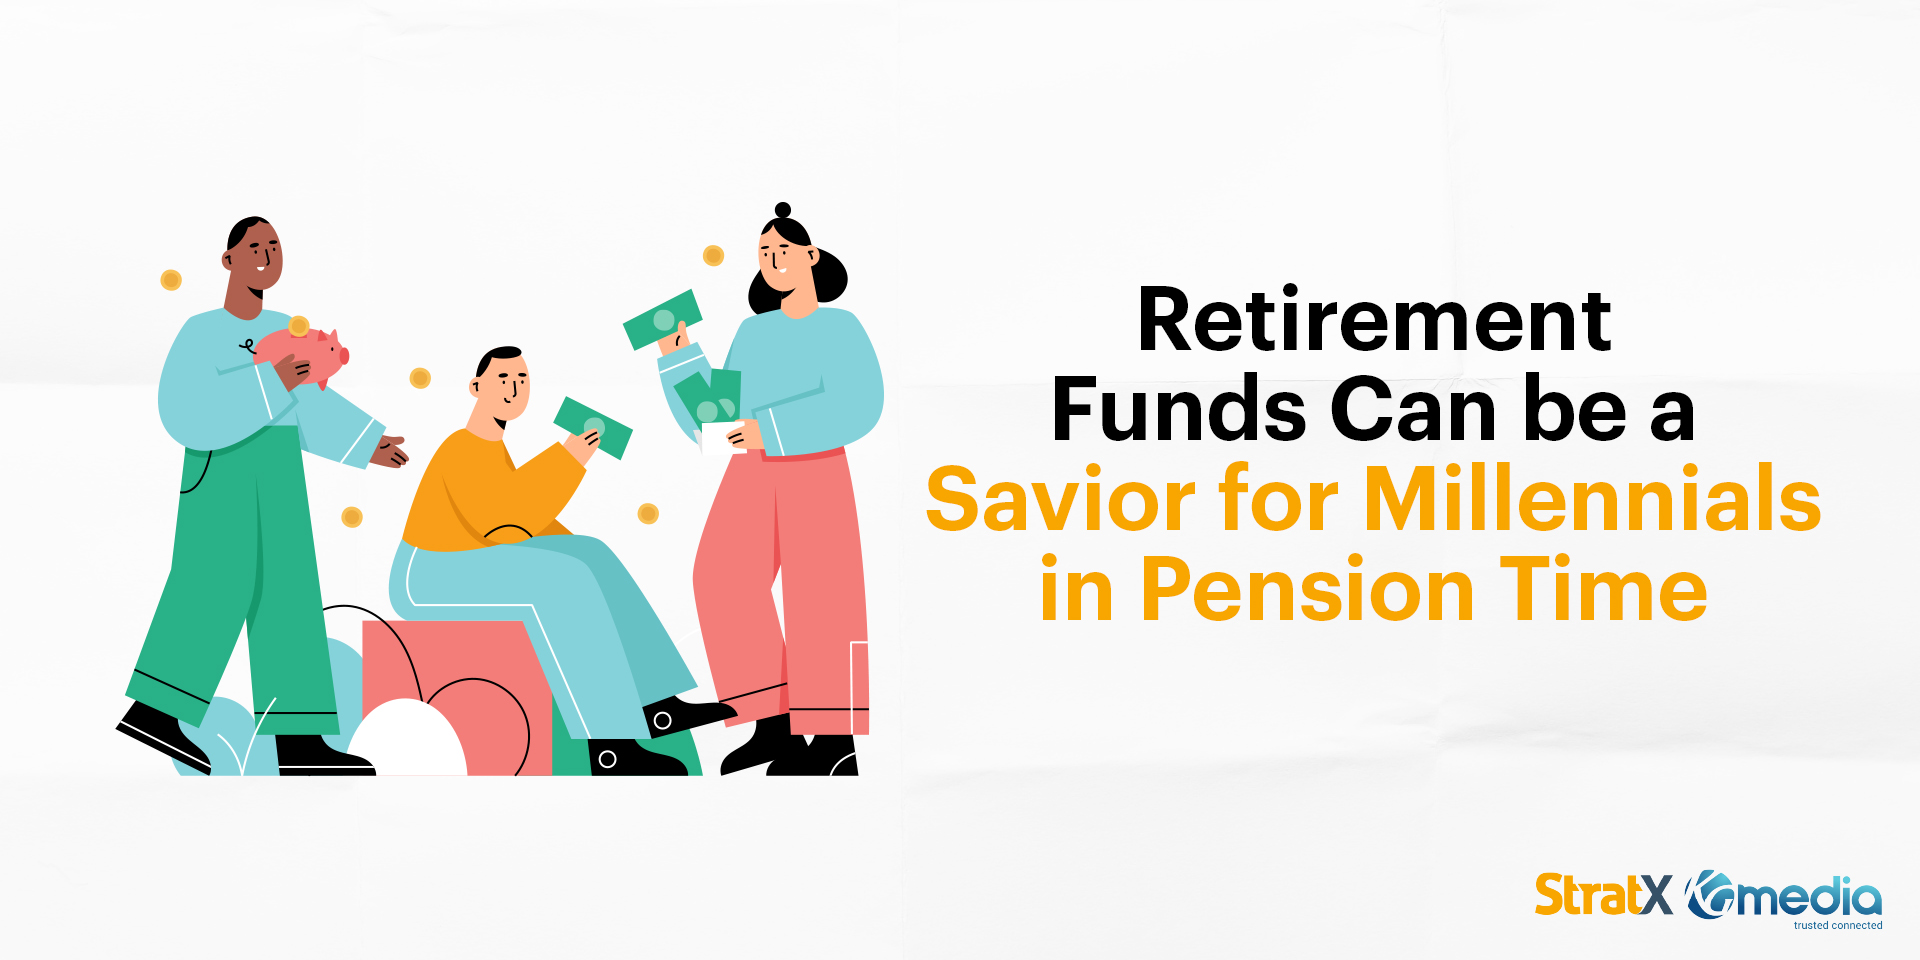 Retirement funds can be a savior for millennials in pension time